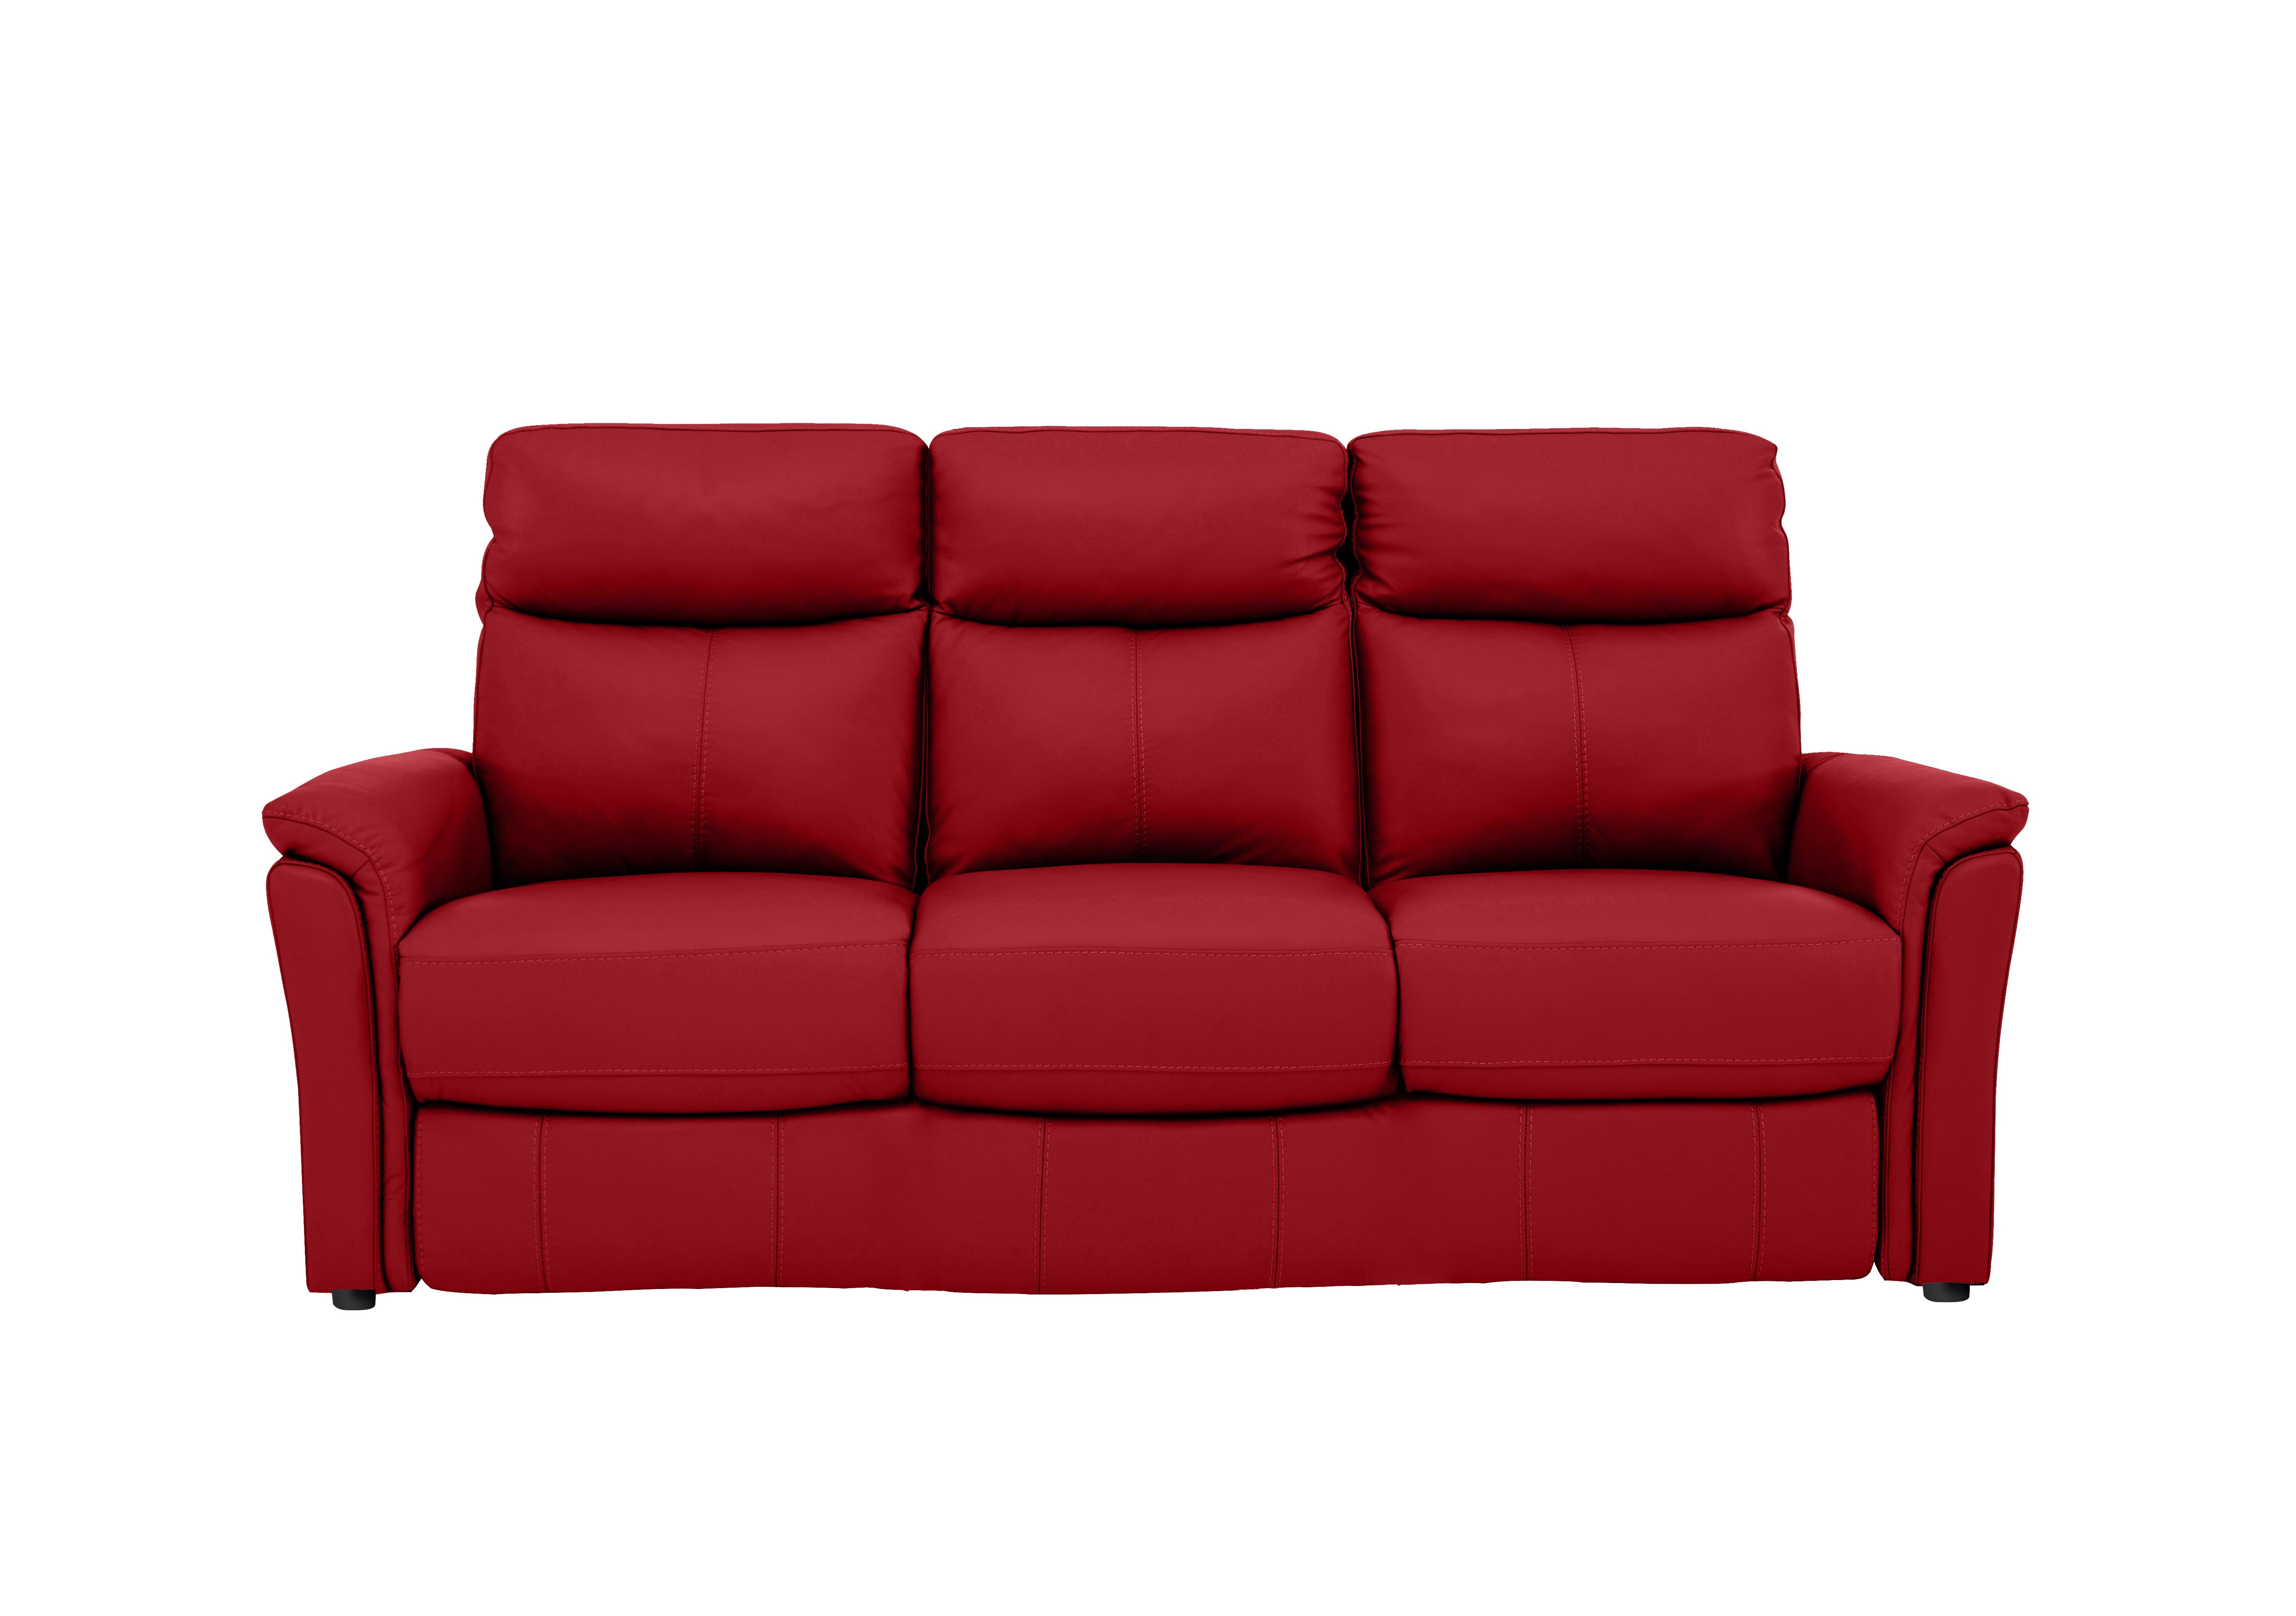 Compact Collection Piccolo 3 Seater Leather Static Sofa in Bv-0008 Pure Red on Furniture Village